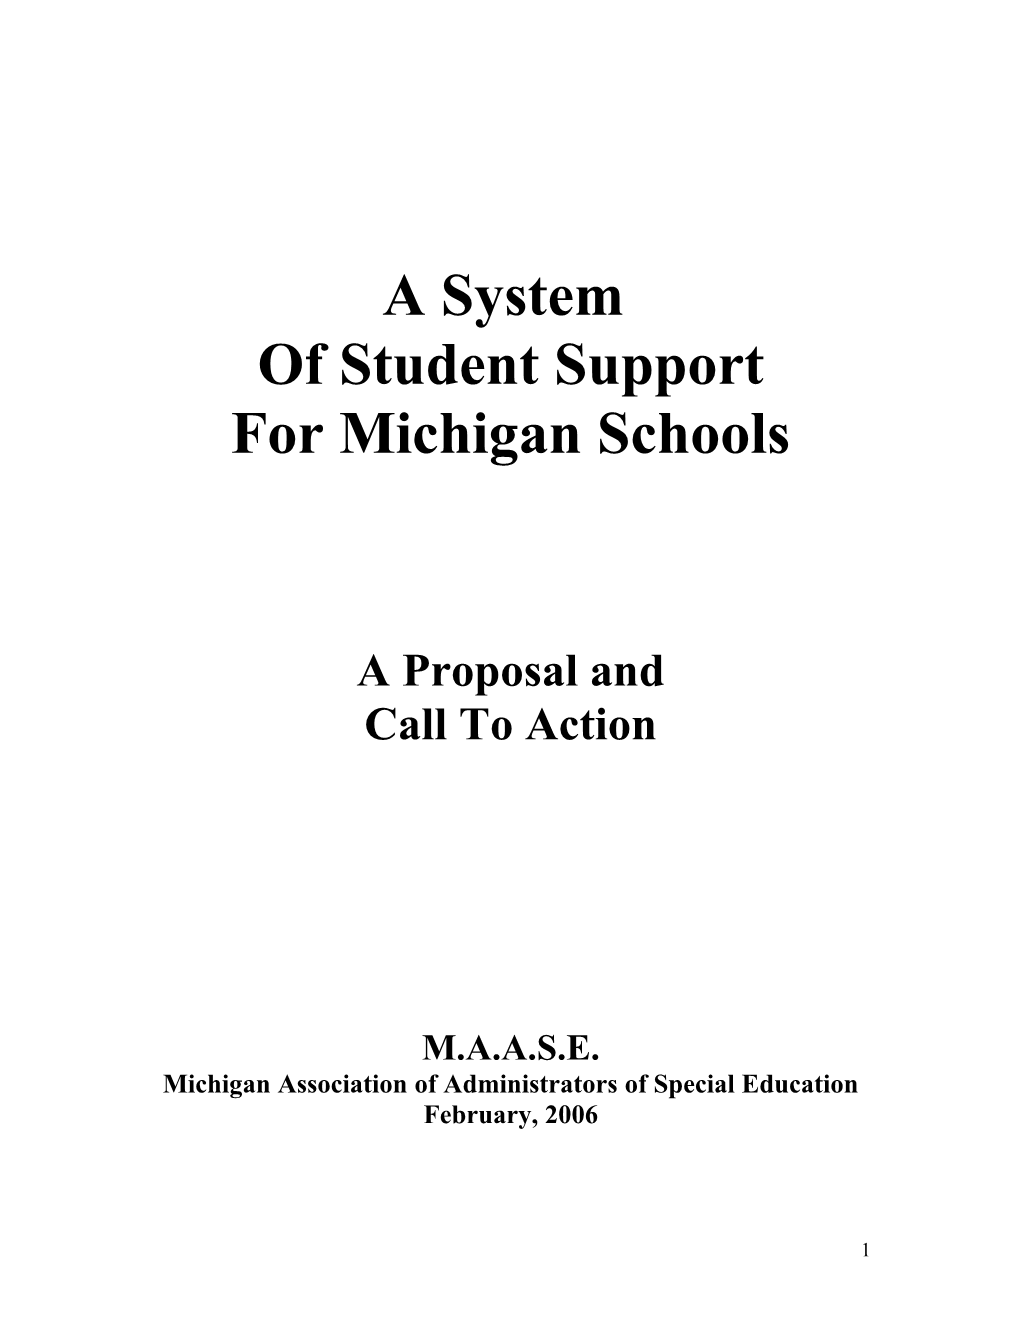 Student Support Systems